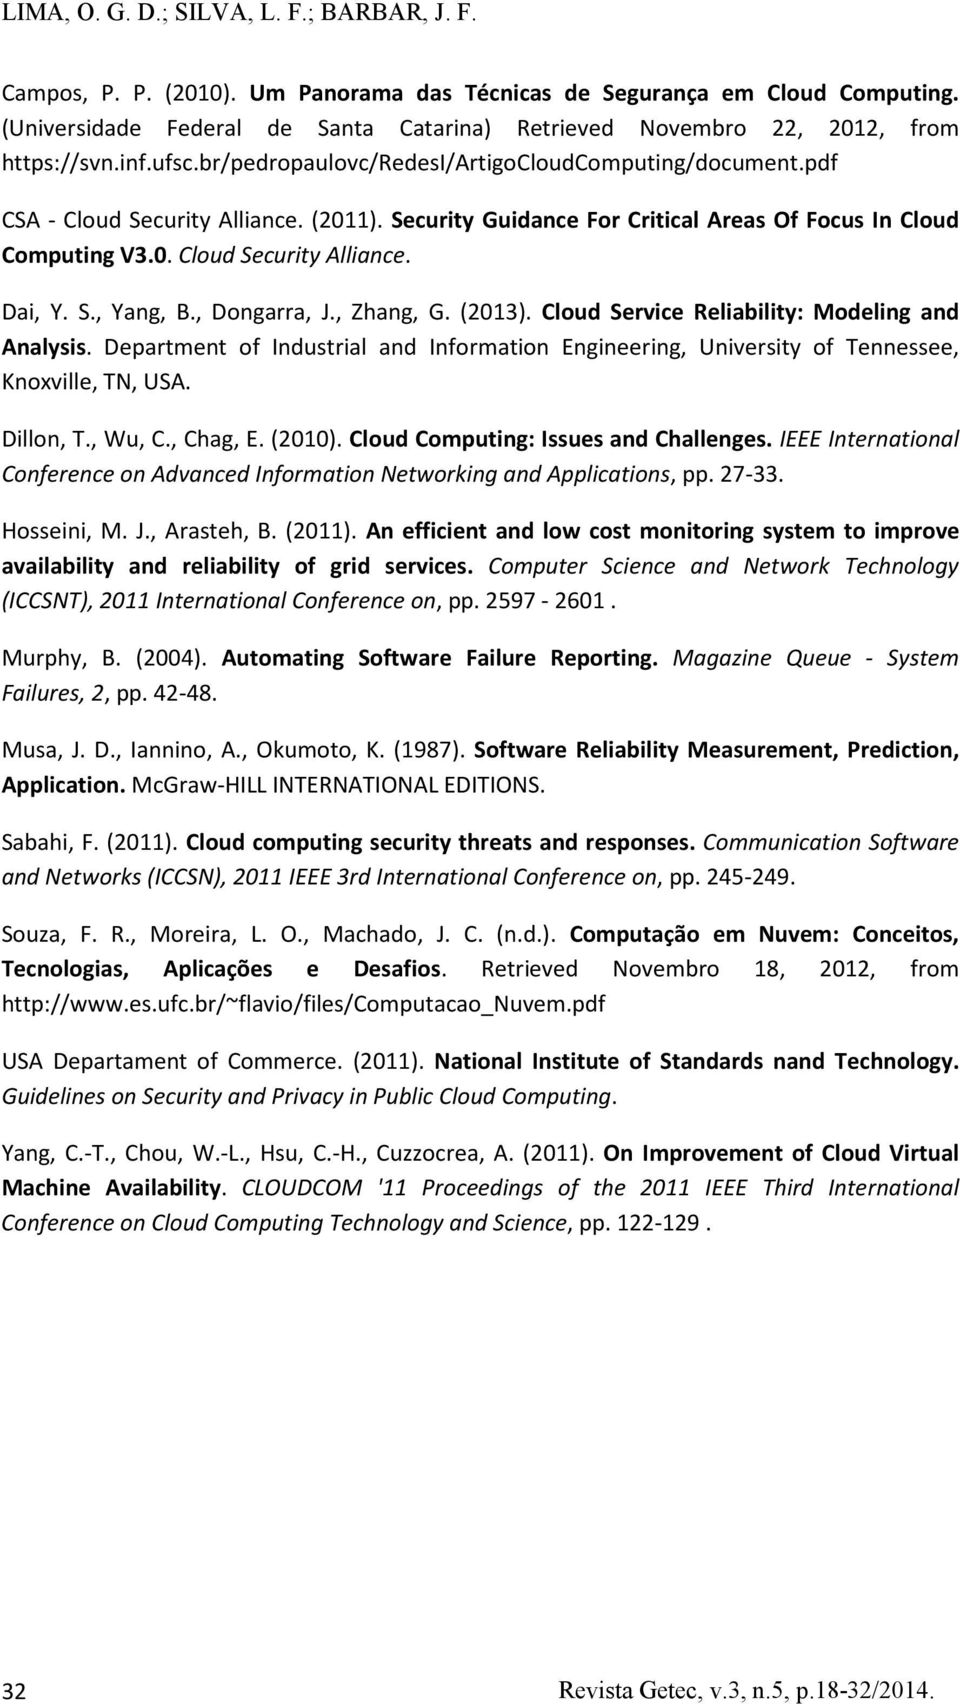 Security Guidance For Critical Areas Of Focus In Cloud Computing V3.0. Cloud Security Alliance. Dai, Y. S., Yang, B., Dongarra, J., Zhang, G. (2013). Cloud Service Reliability: Modeling and Analysis.